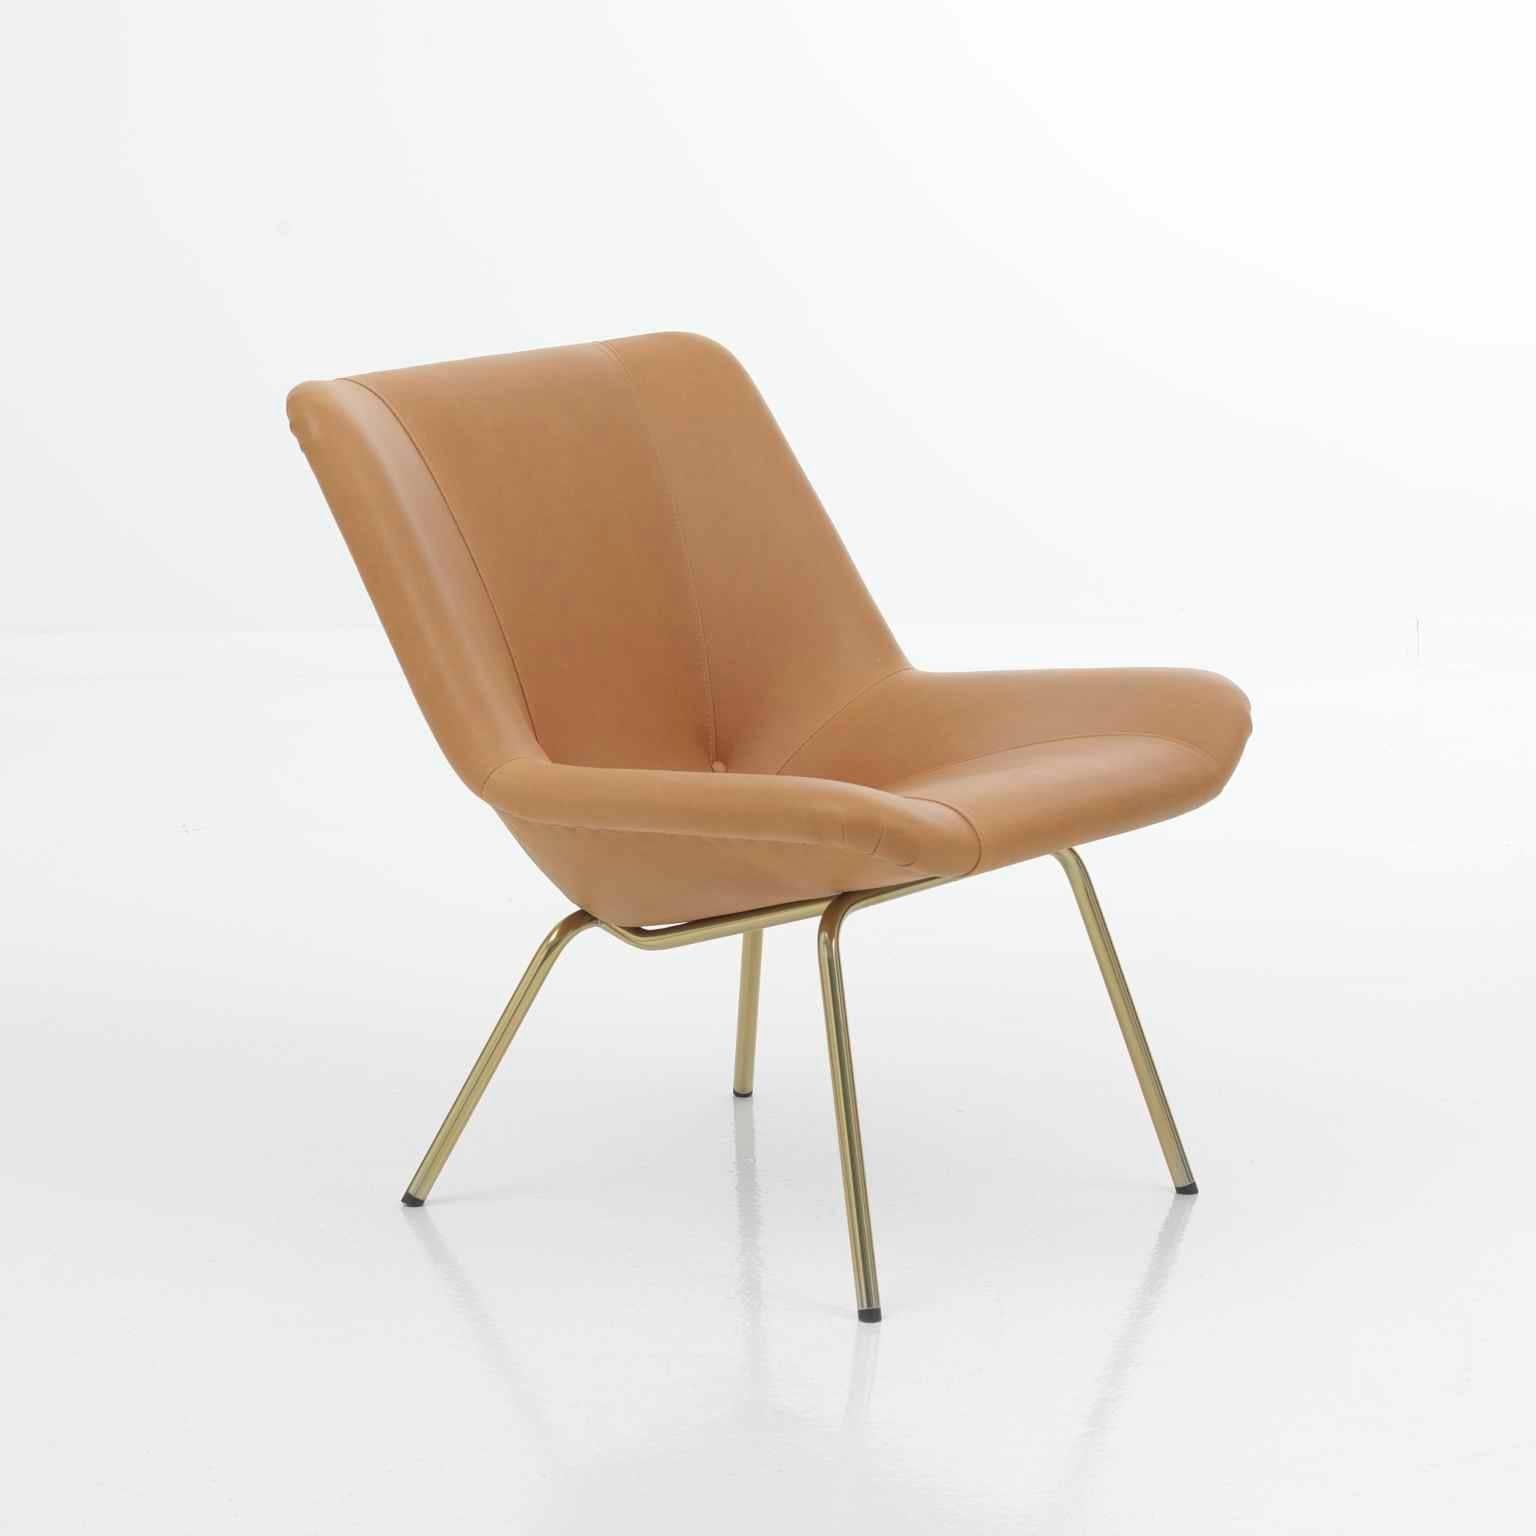 The Lehti chair combines an upholstered seat with legs of metal tubing. Although it was designed already in 1956, this chair is of Streamlined Modern form. The frame of the Lehti chair, like all reissued versions of furniture by Carl Gustav Hiort af